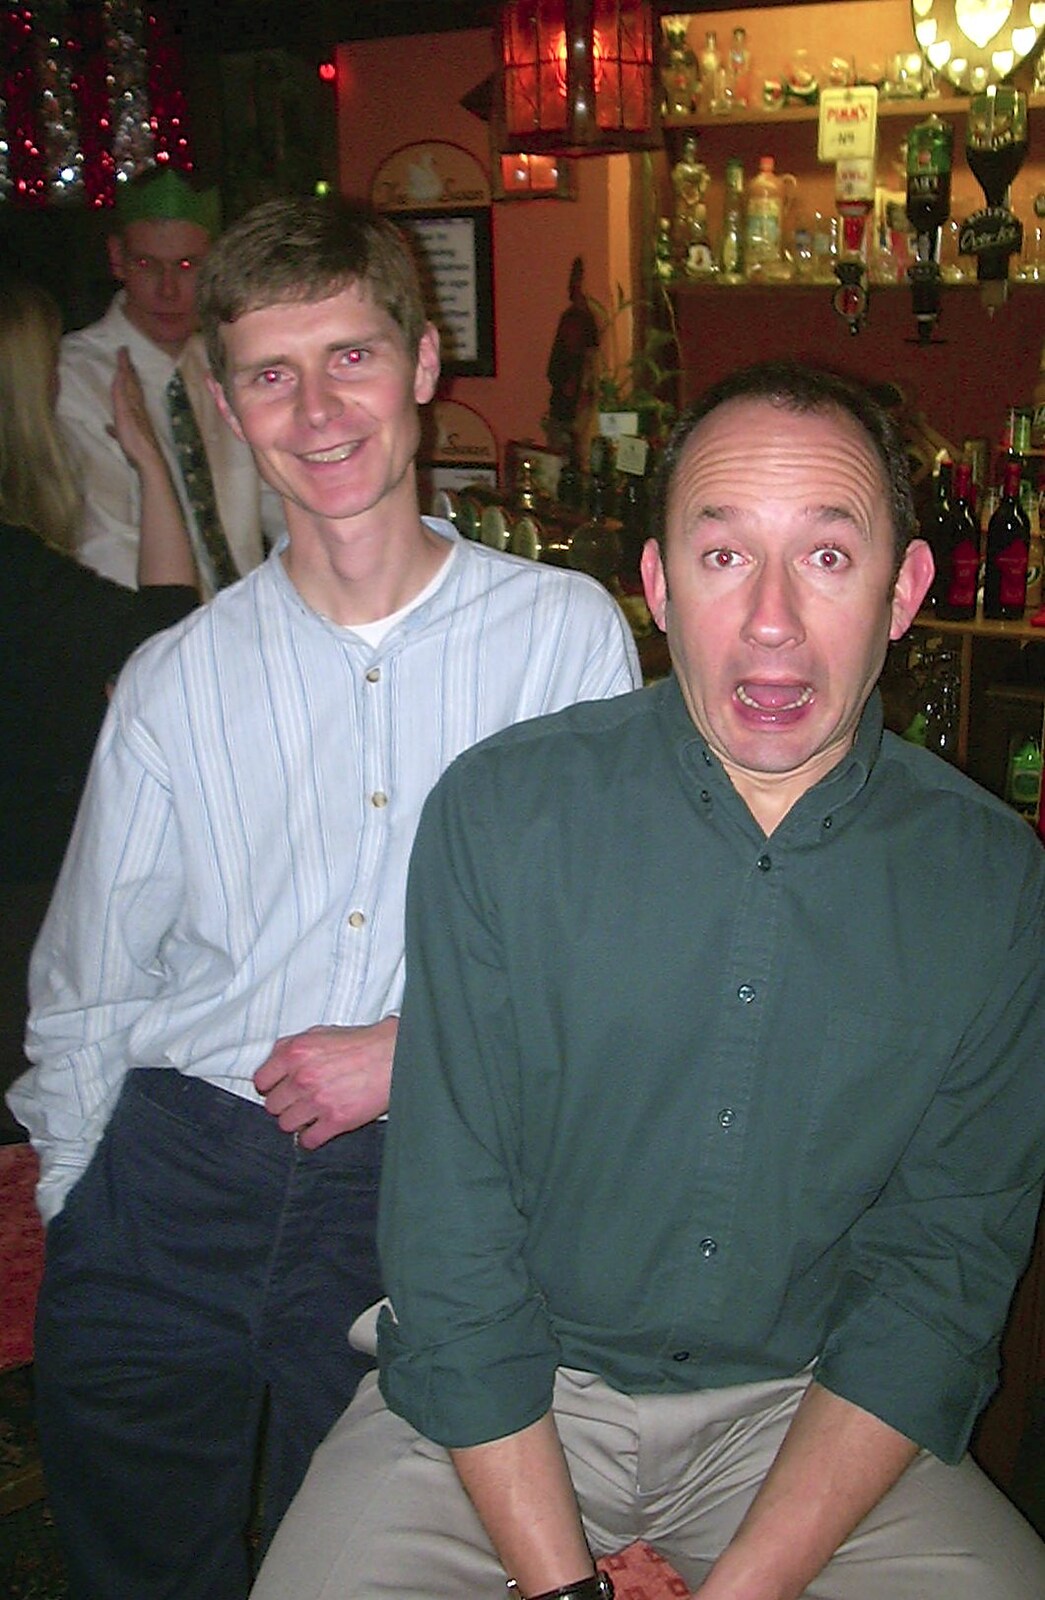 The BSCC Christmas Dinner, The Swan Inn, Brome, Suffolk  - 6th December 2003: DH looks surprised